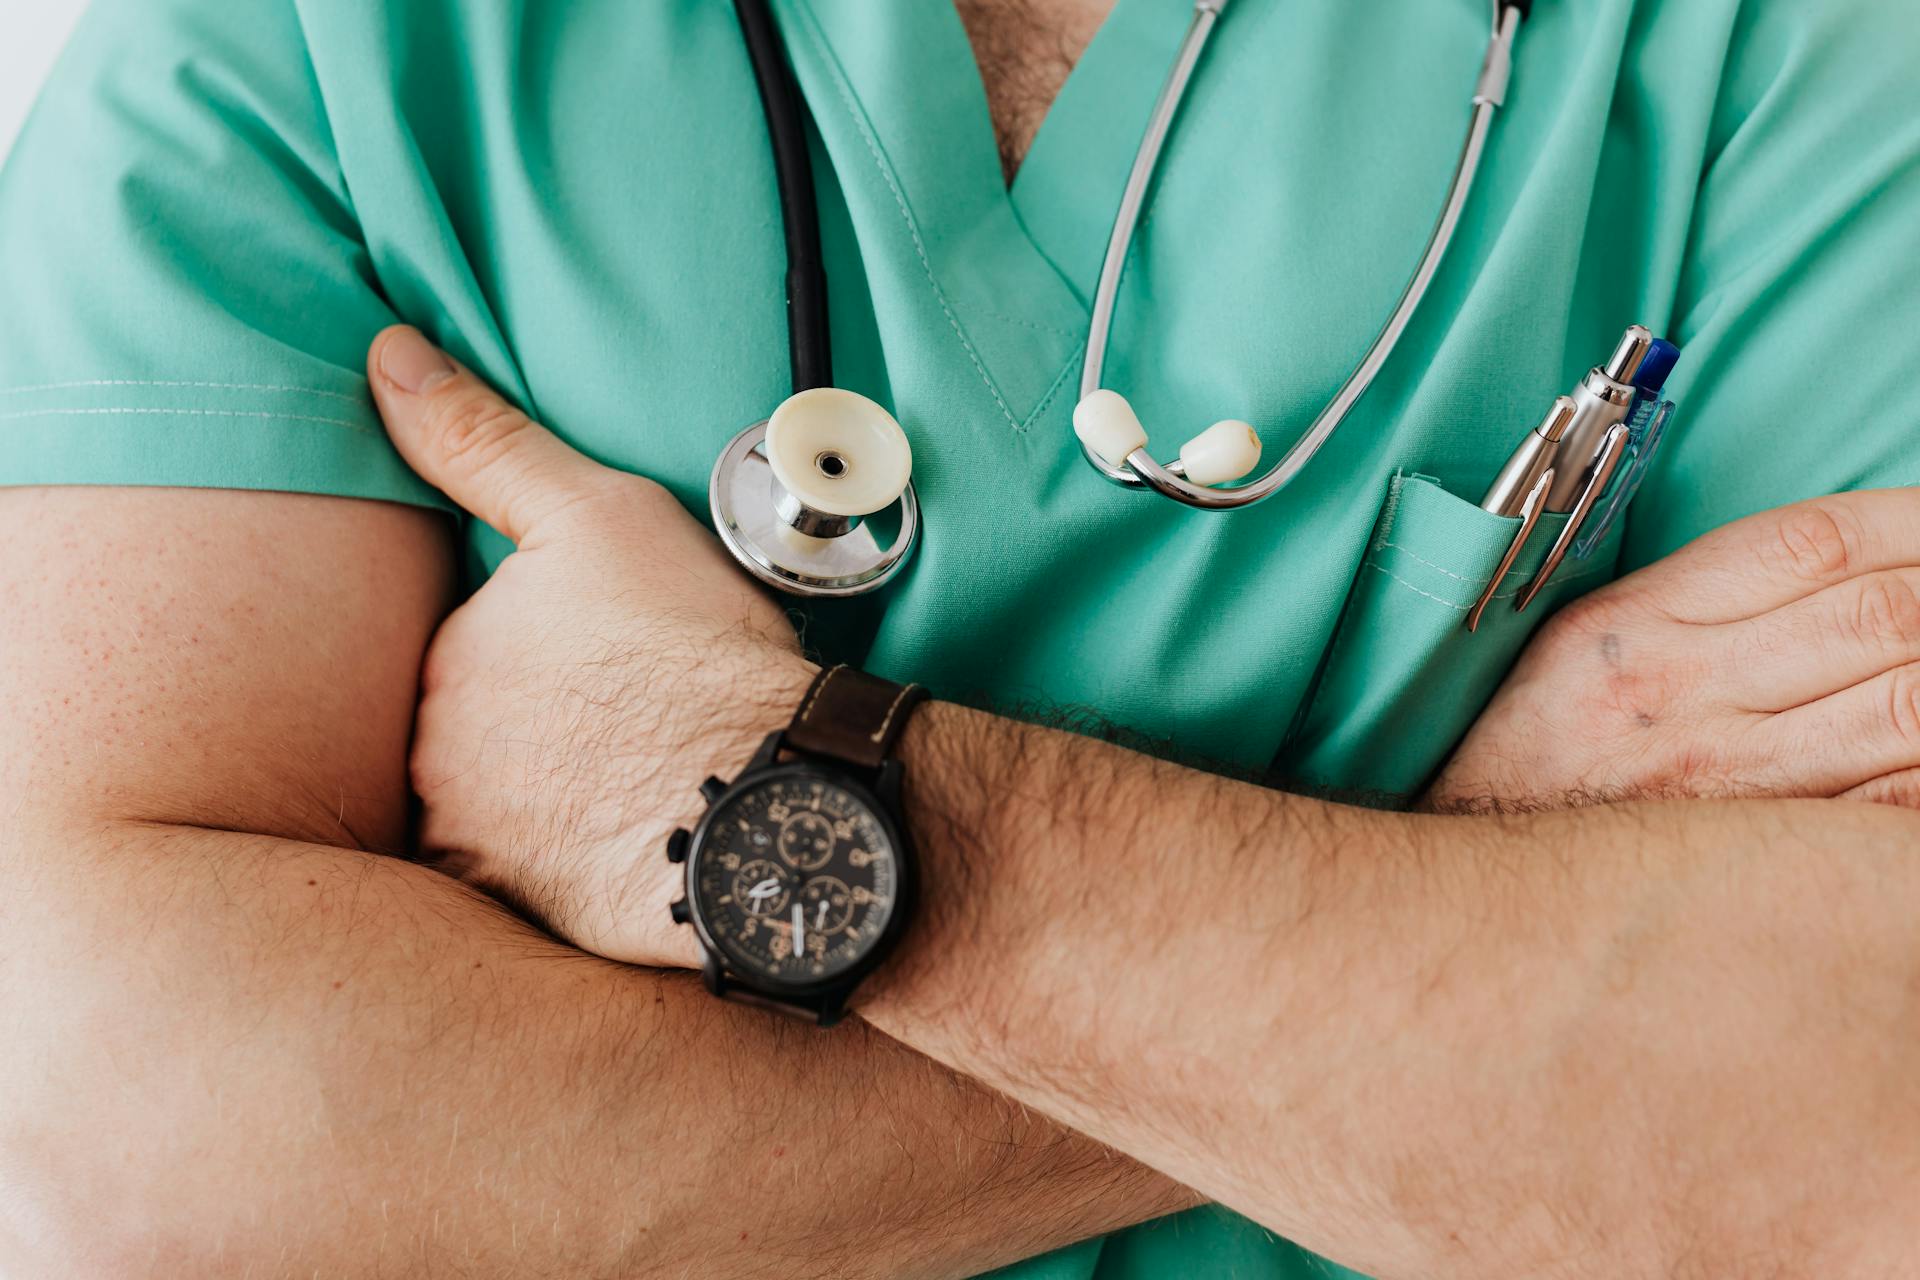 A doctor with folded arms | Source: Pexels